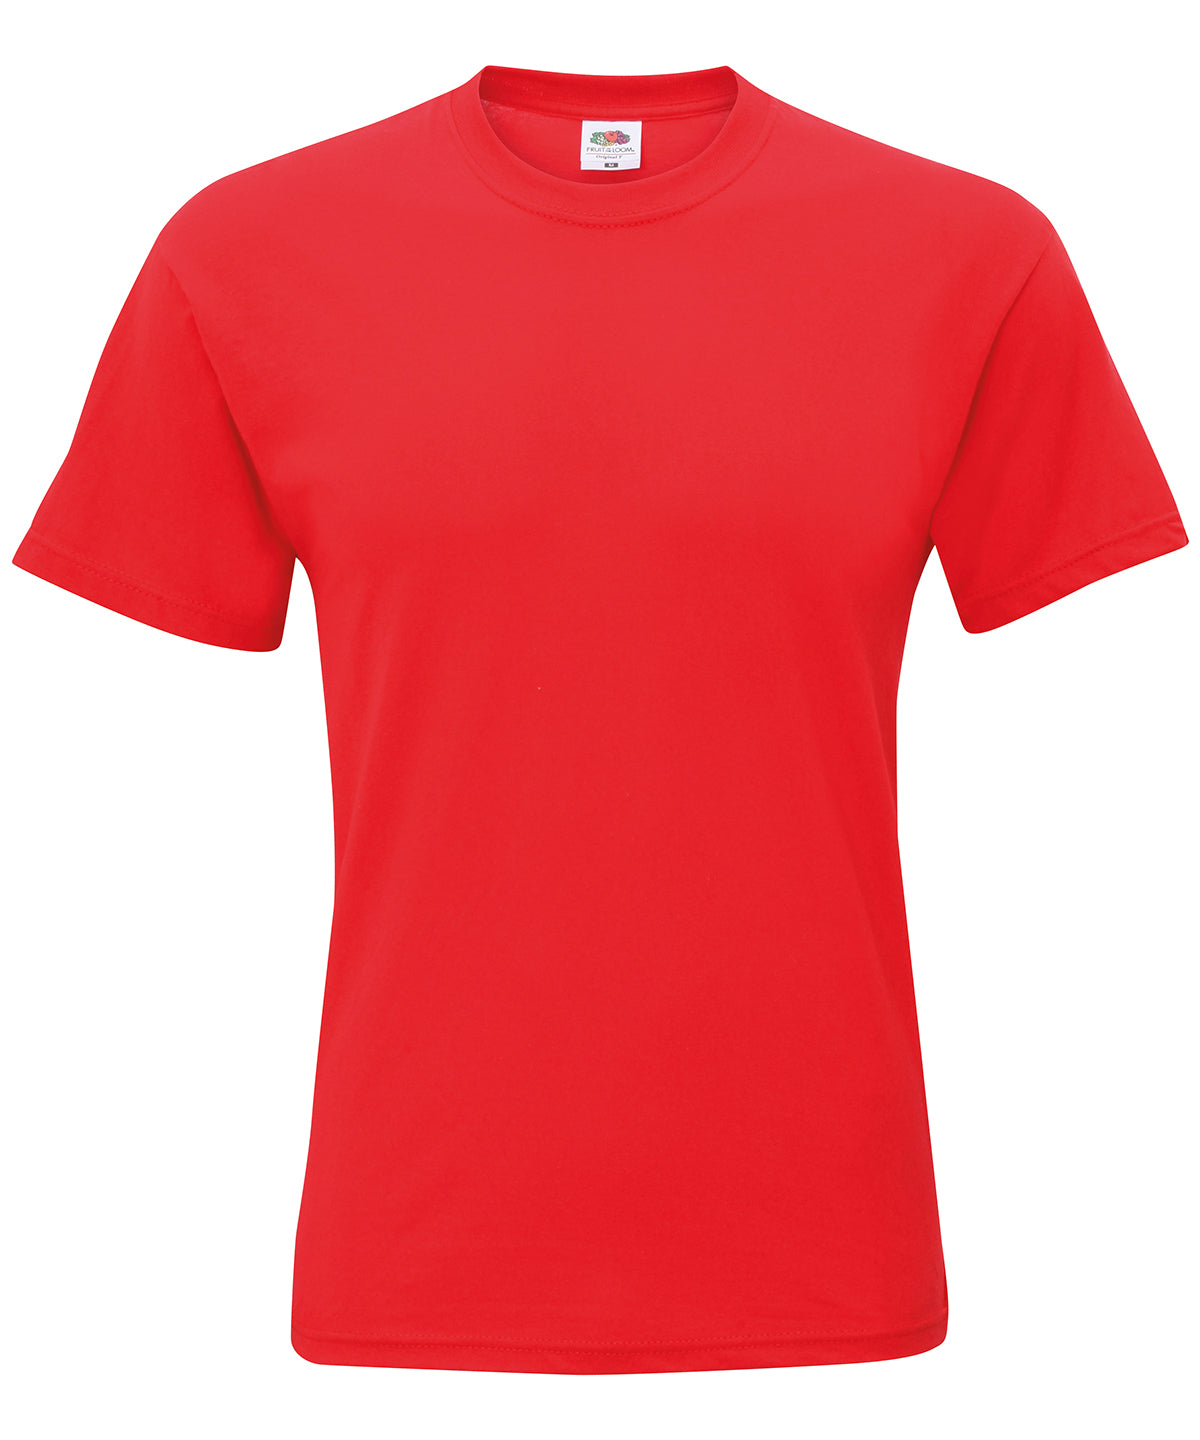 Fruit of the Loom Original T Red